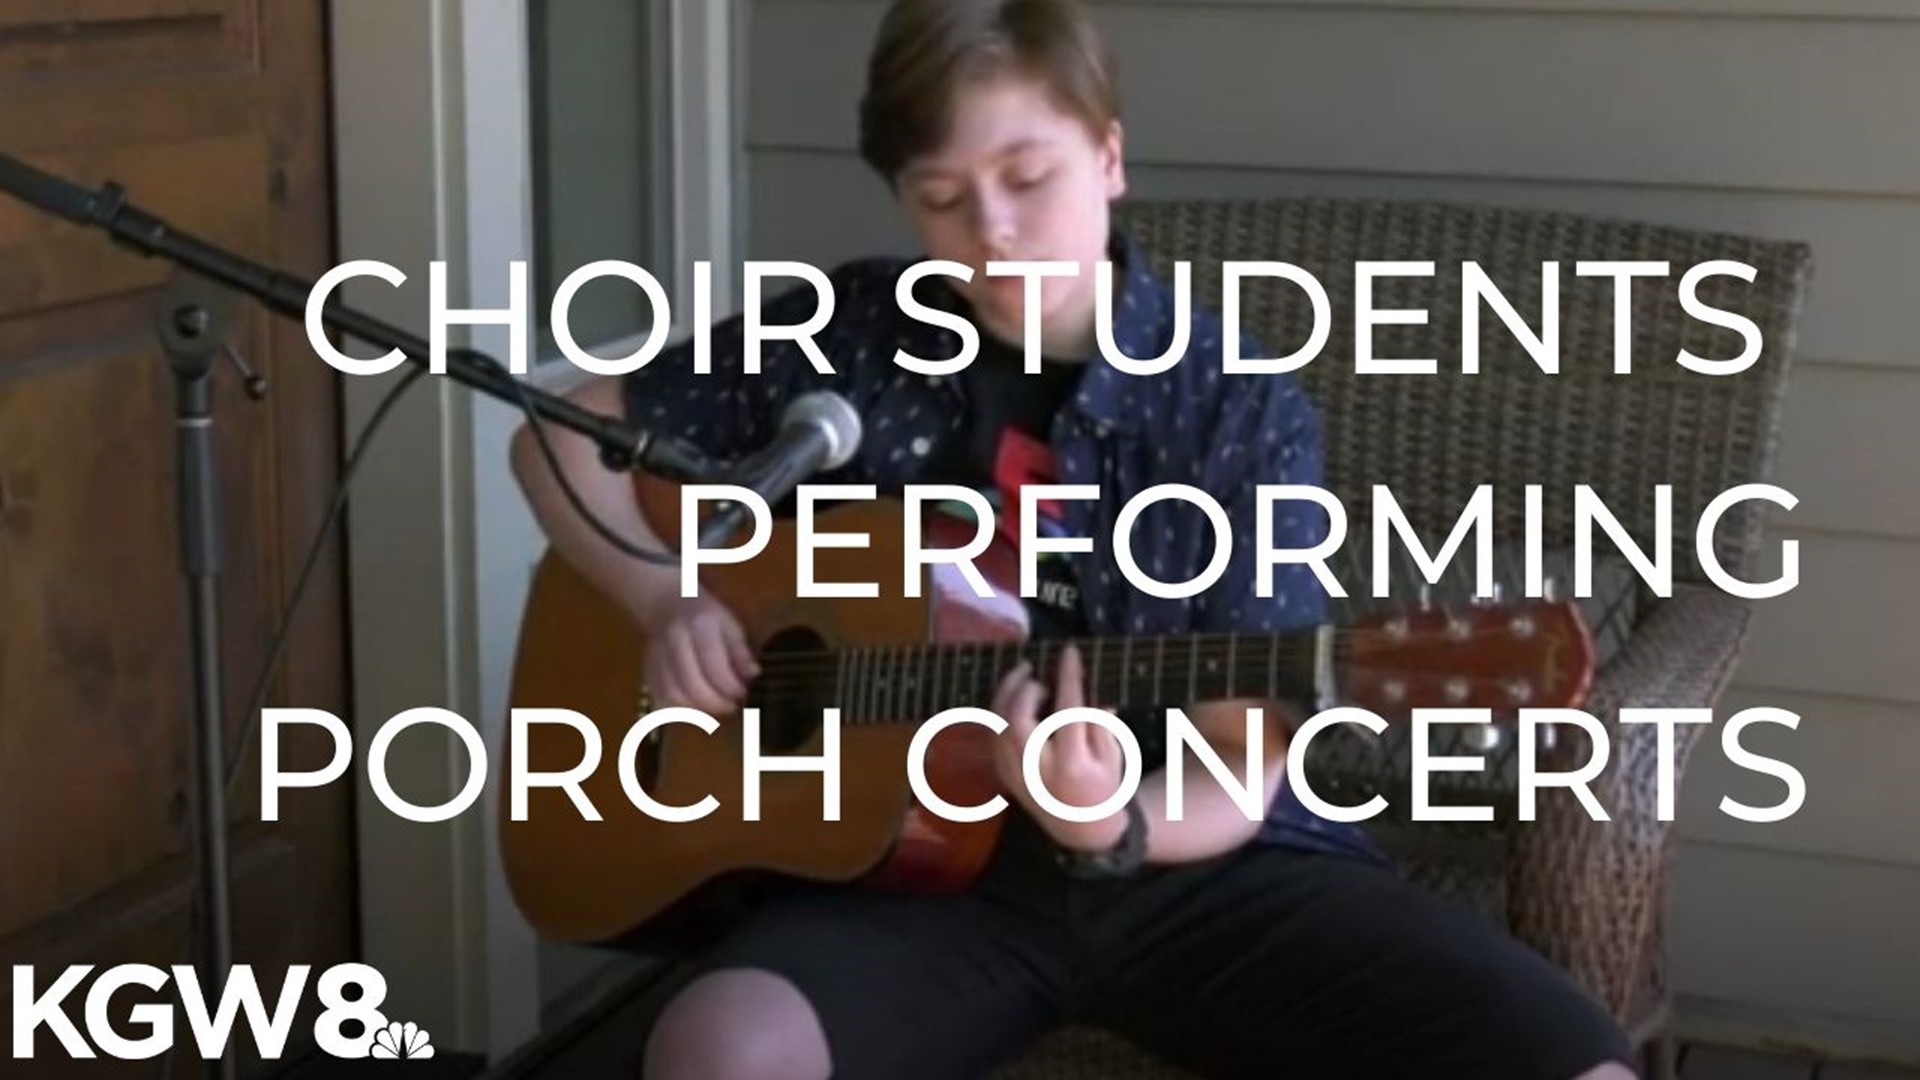 Choir students in the Evergreen School District are performing porch concerts. Devon Haskins shows us how.